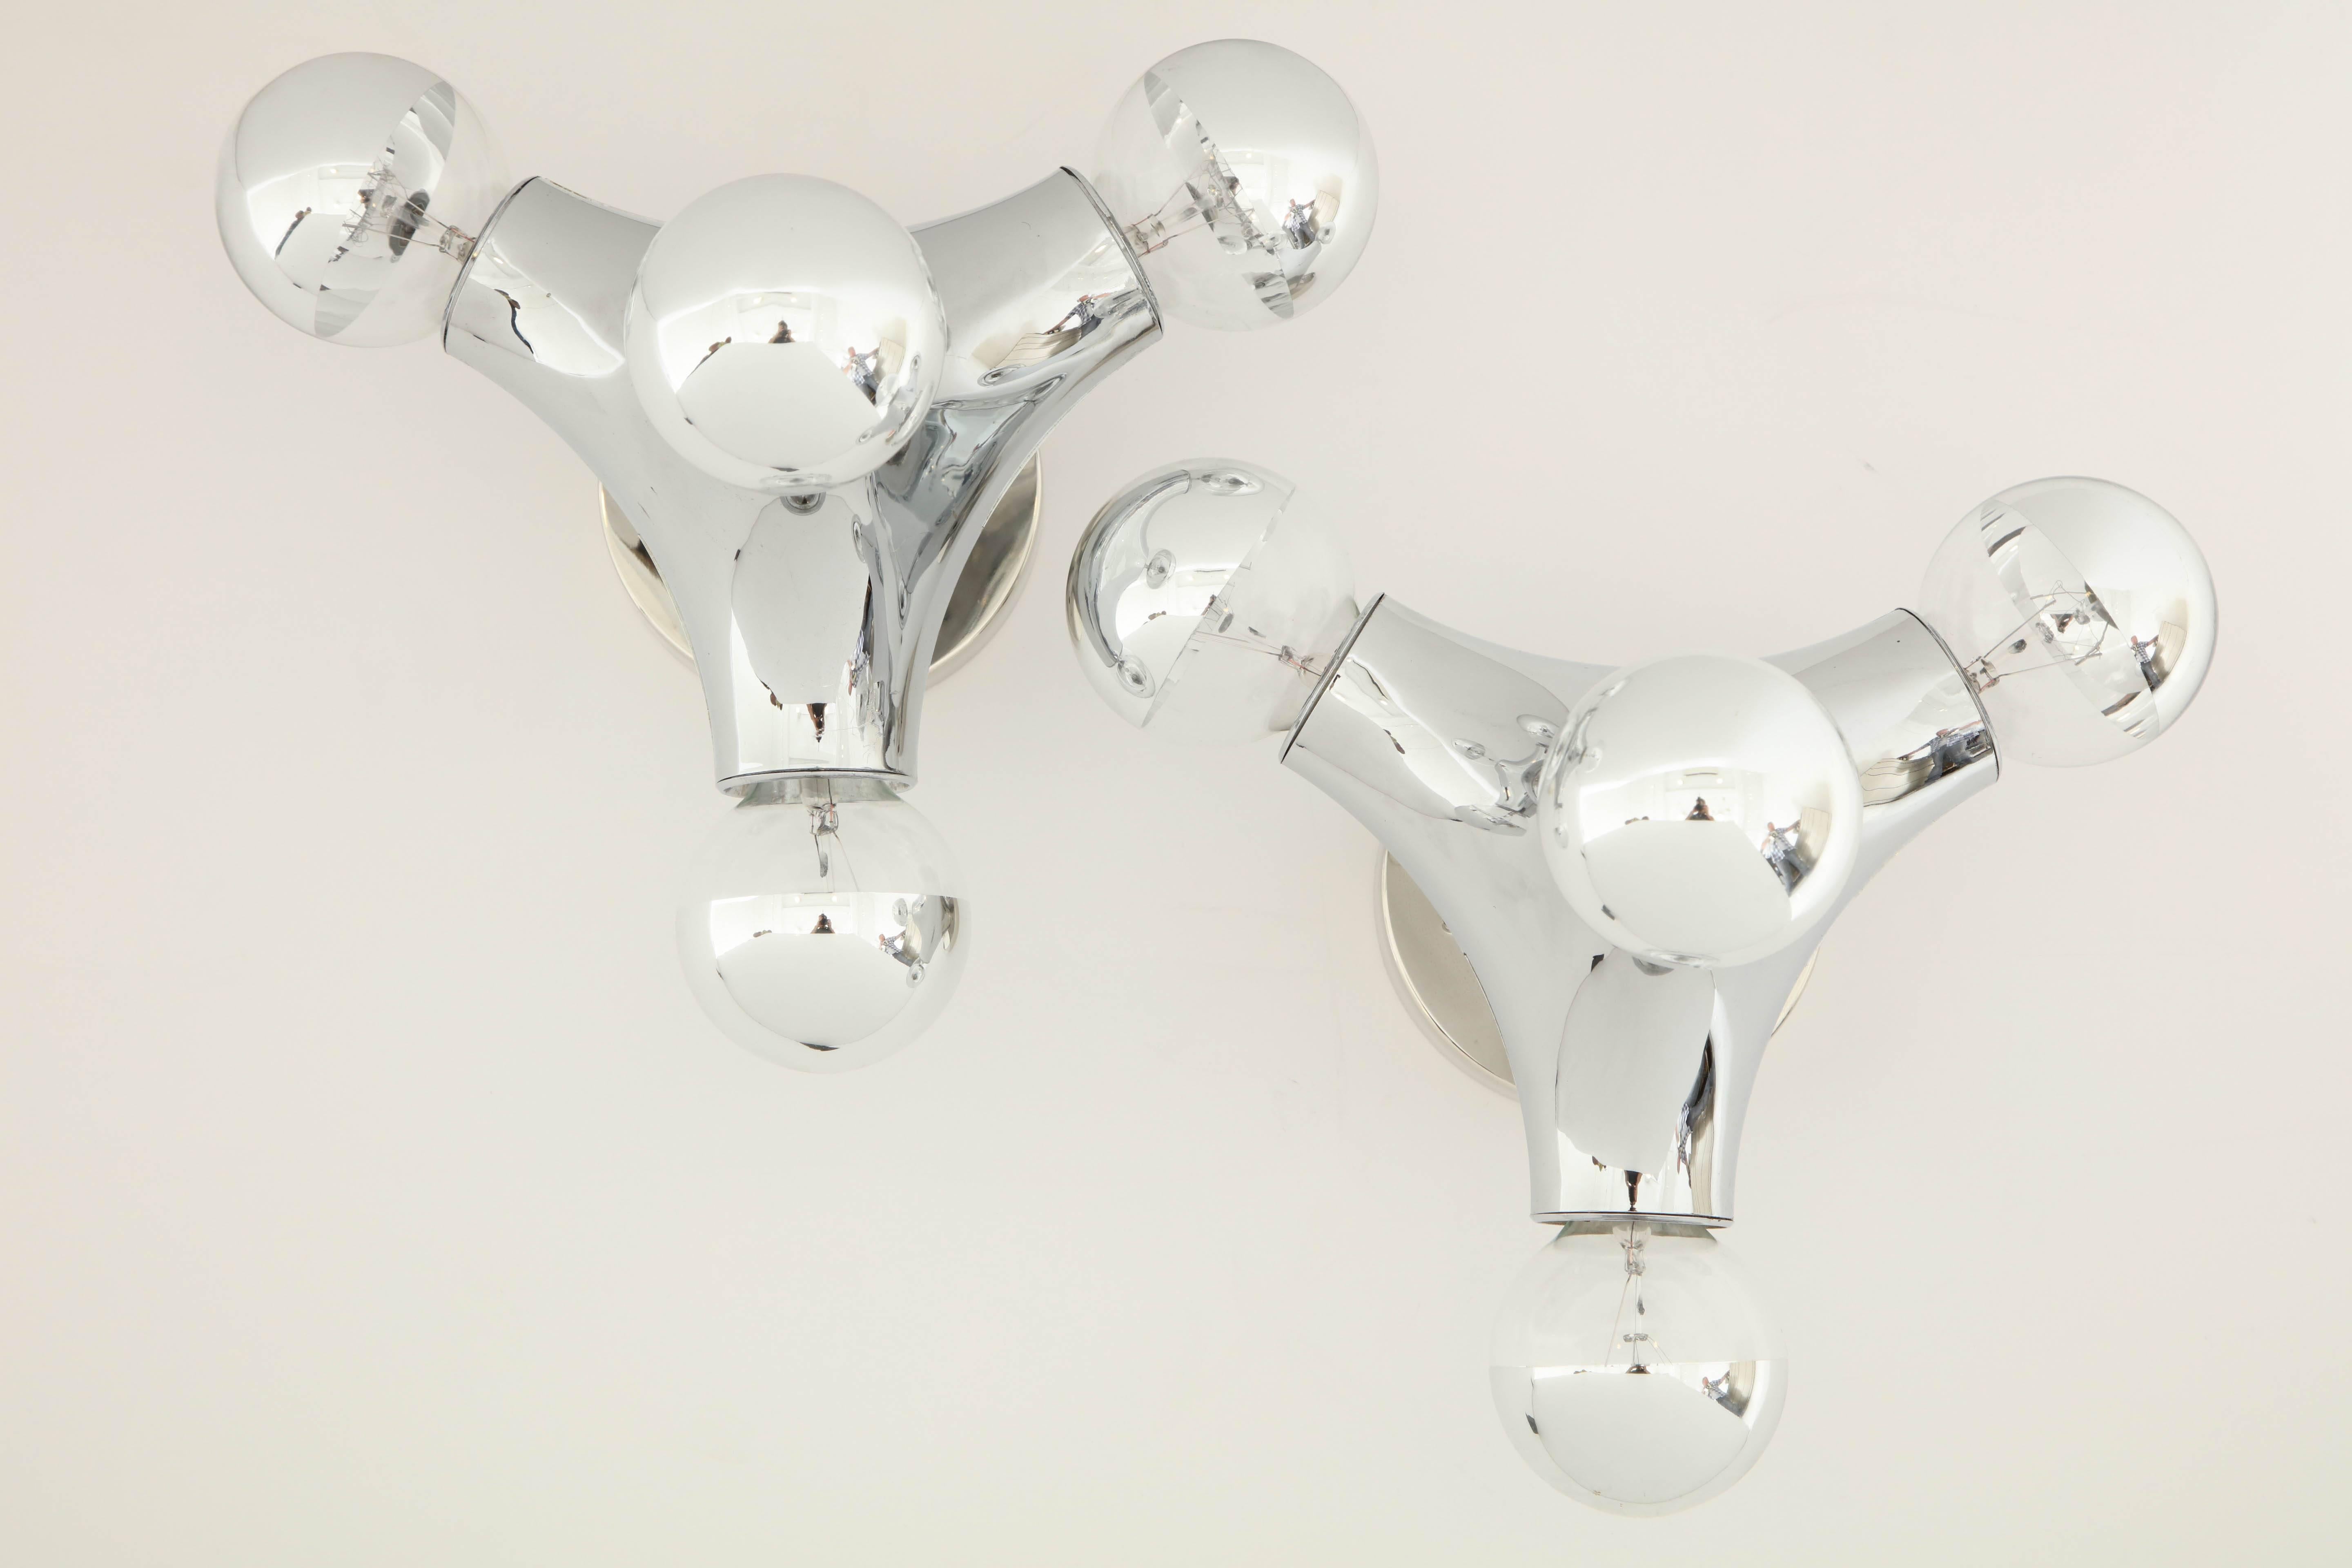 Pair of 1960s German Space Age wall or ceiling lights by Cosack
High polished PVC fixture has four-light sources that have been newly rewired for the US and the fixtures come complete with chrome capped bulbs.